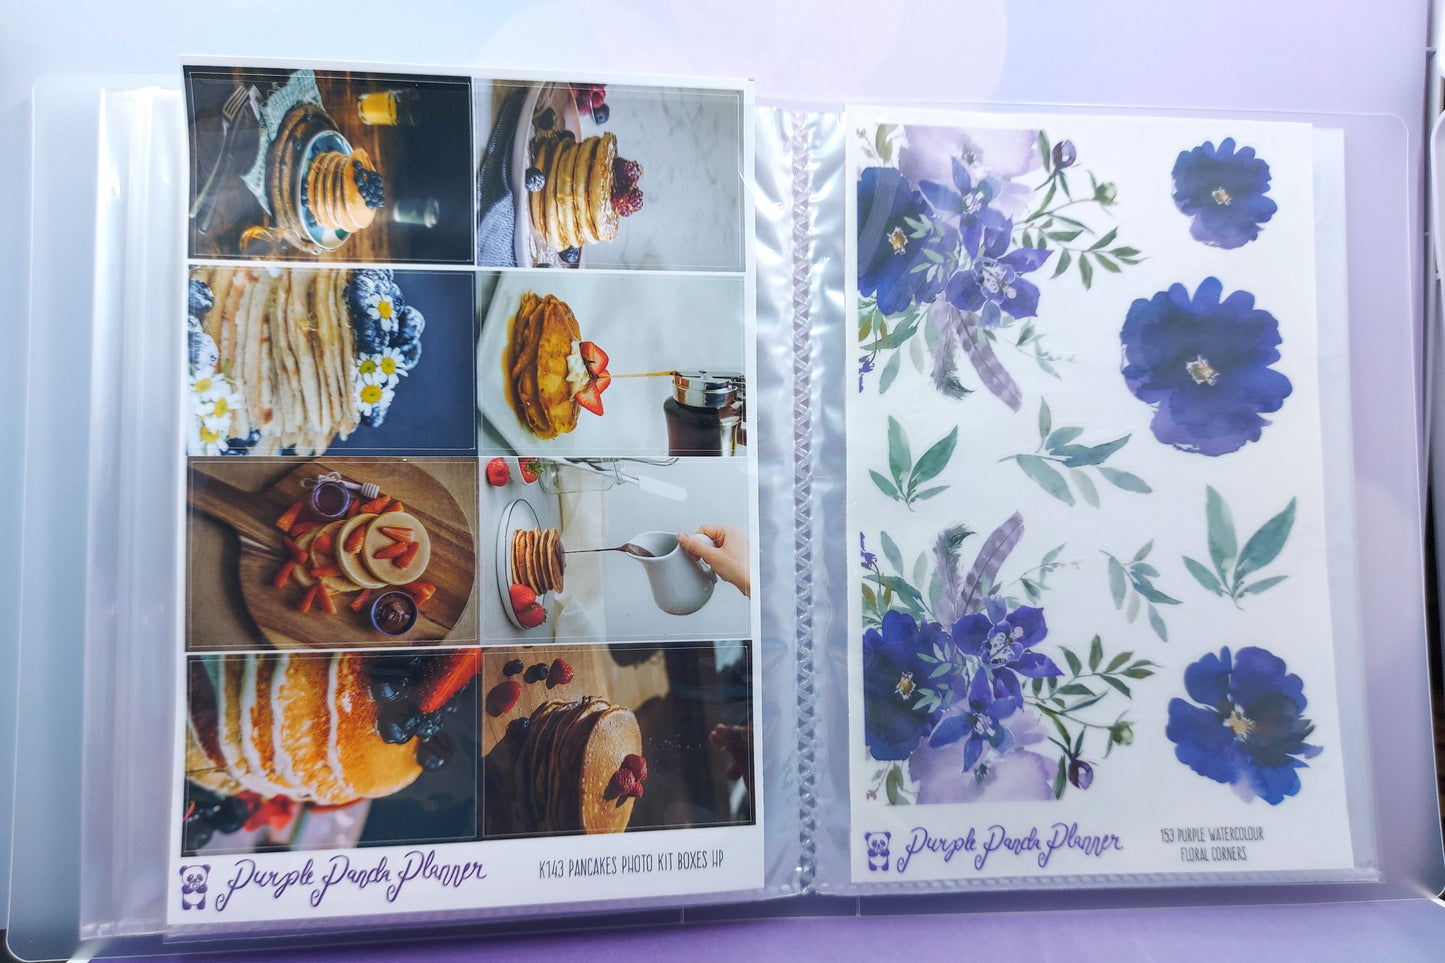 Large Sticker Album (5" x 7") - Teal Floral Cover with Holo Laminate Overlay